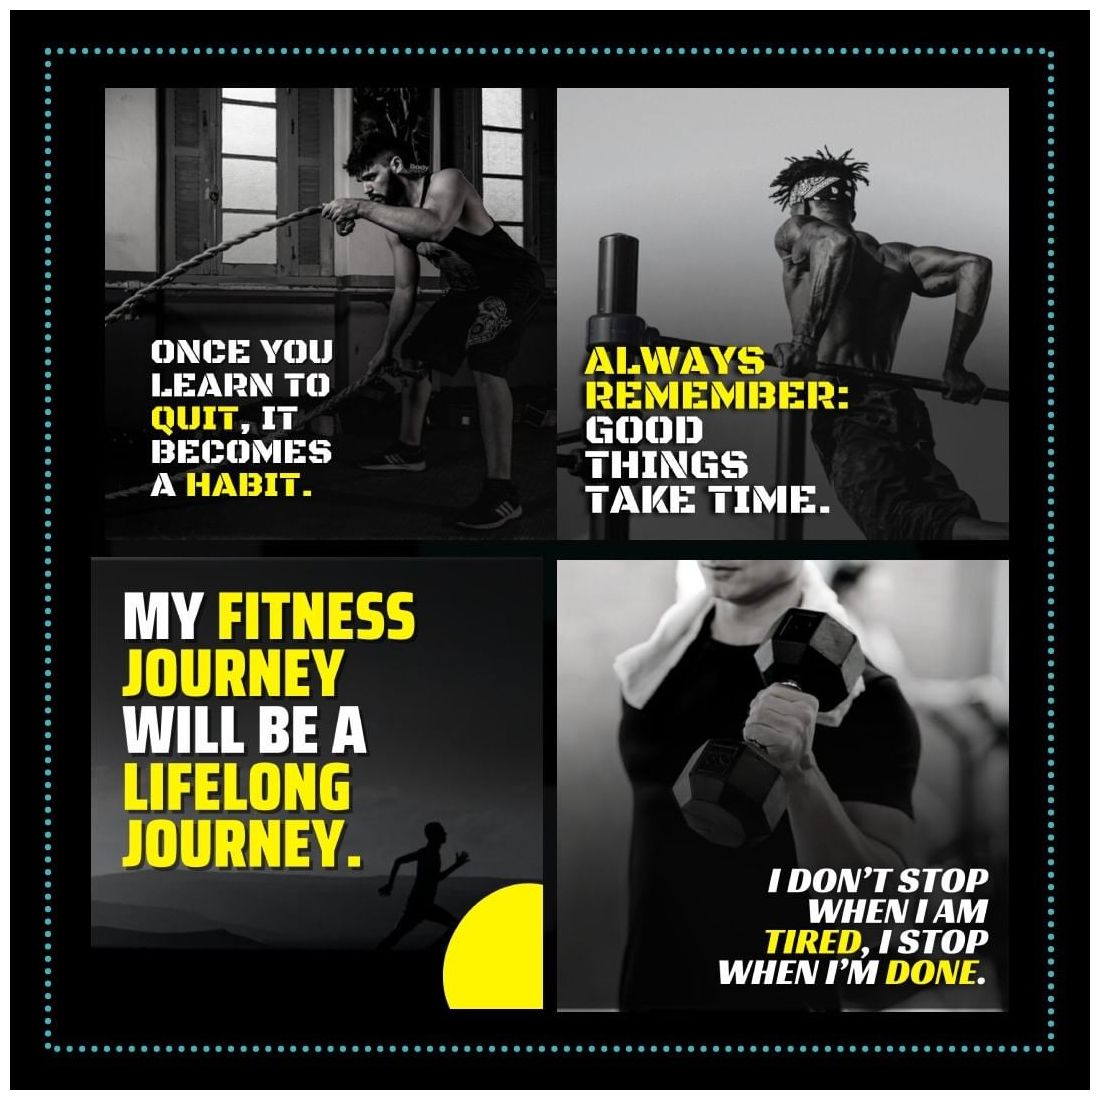 Fitness Coach and GYM Owners Canva Templates Bundle cover image.